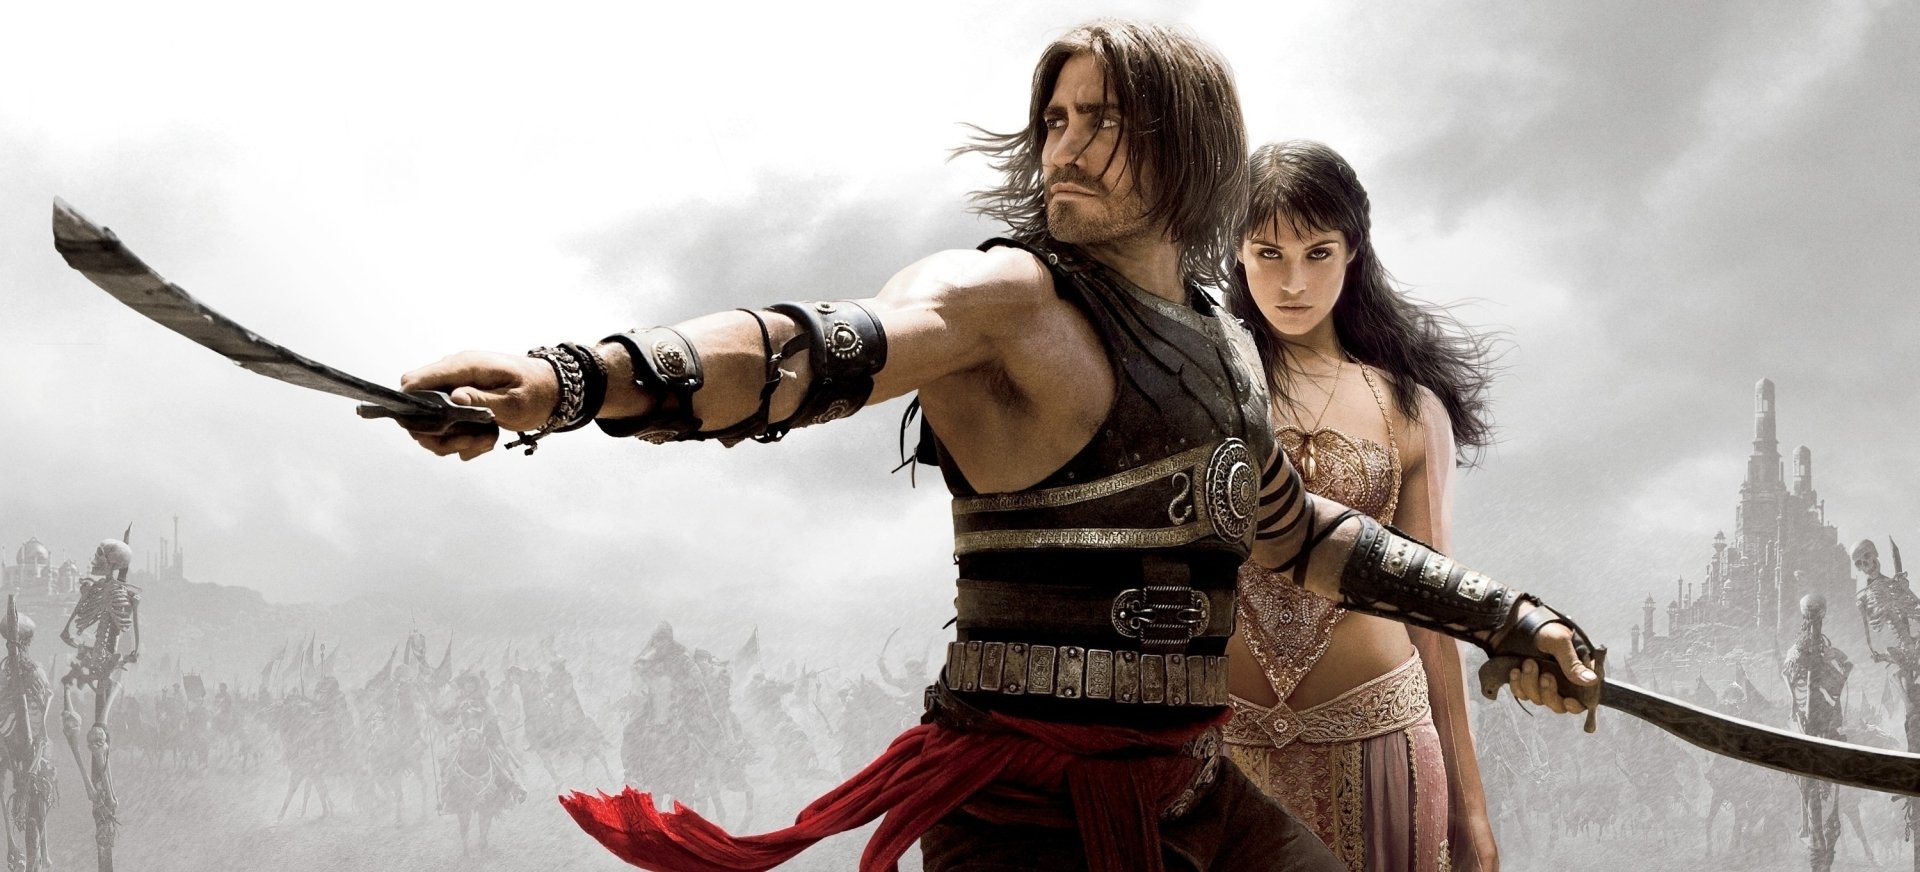 prince-of-persia-the-sands-of-time-full-hd-wallpaper-and-background-image-3000x1362-id-466085